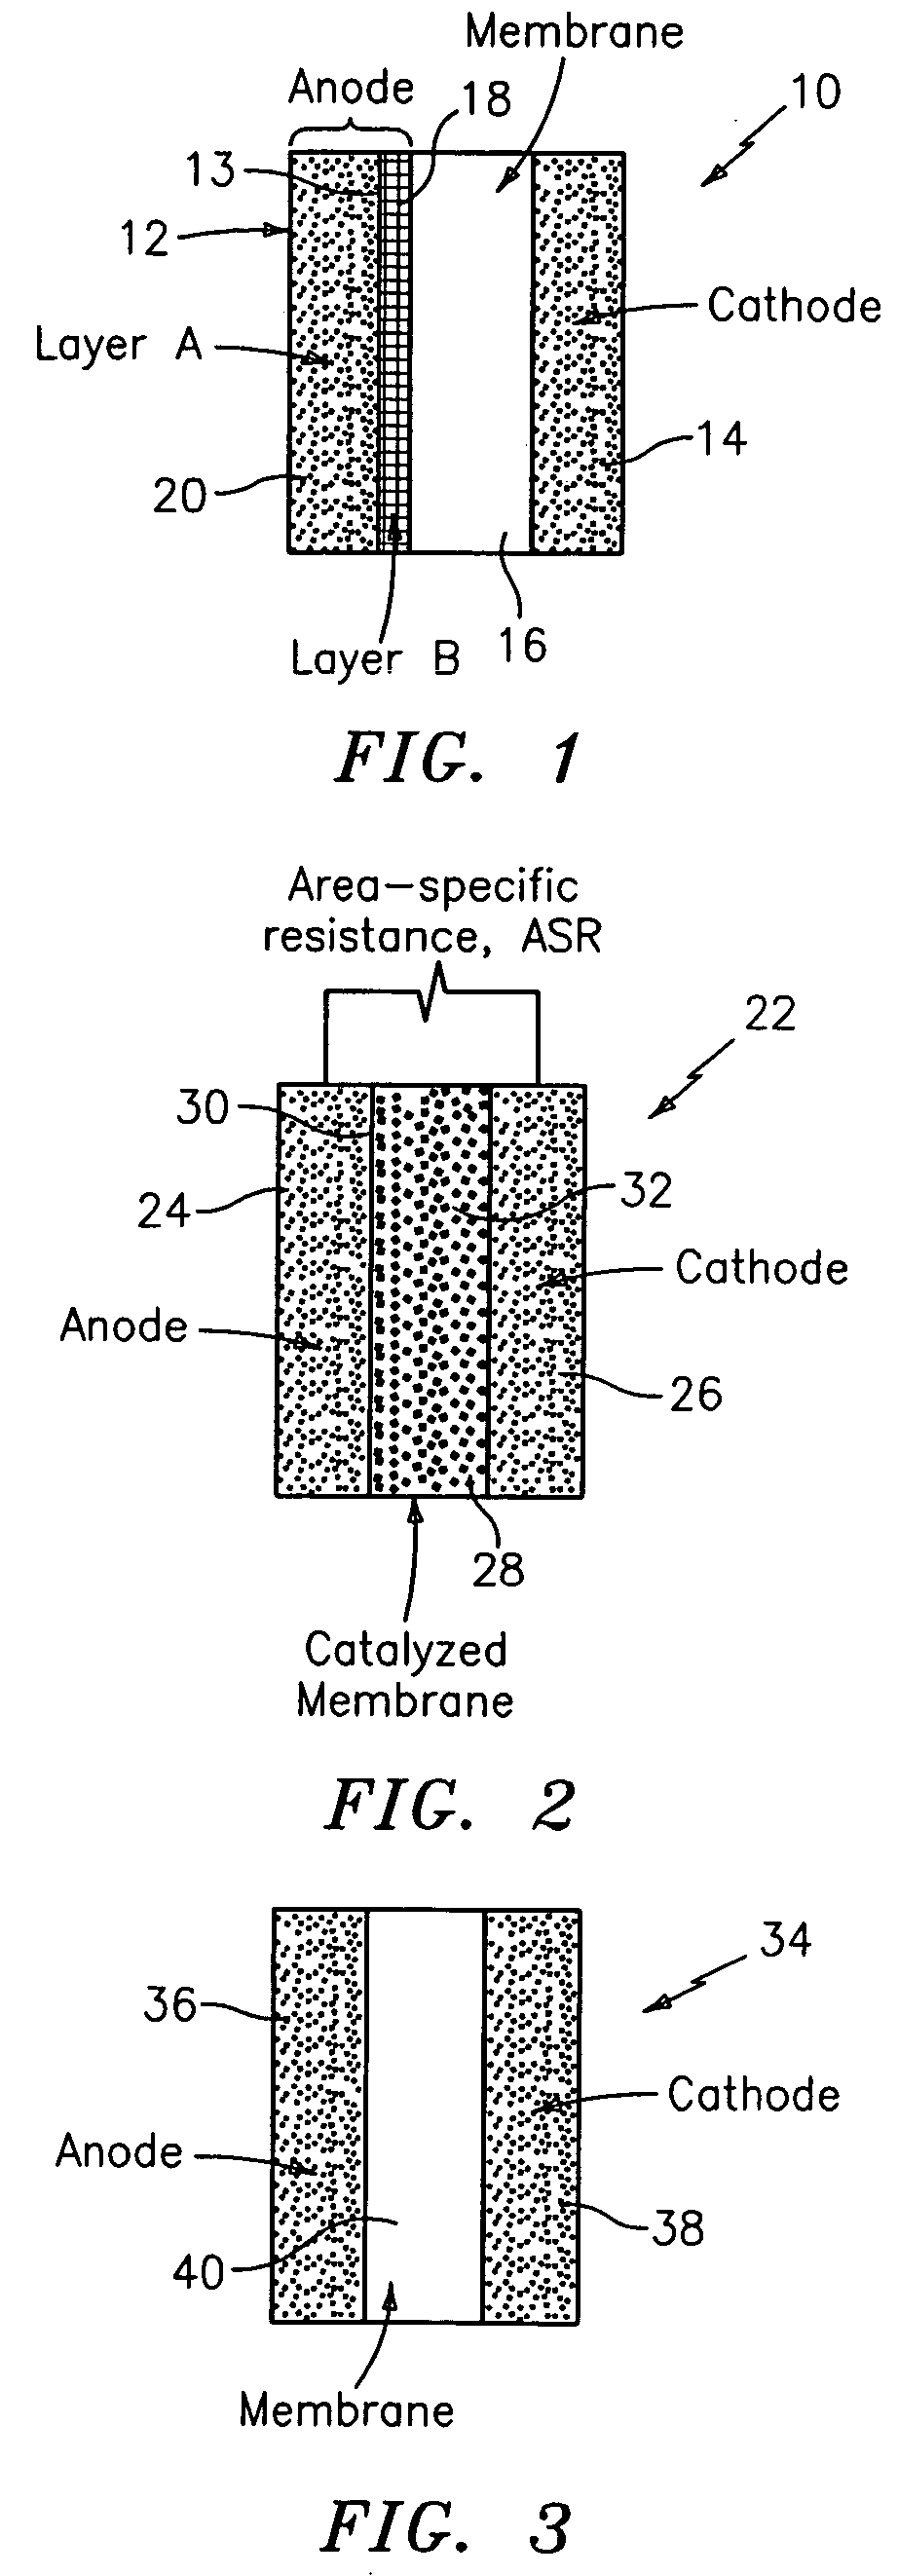 Method for preparing membranes and membrane electrode assemblies with hydrogen peroxide decomposition catalyst